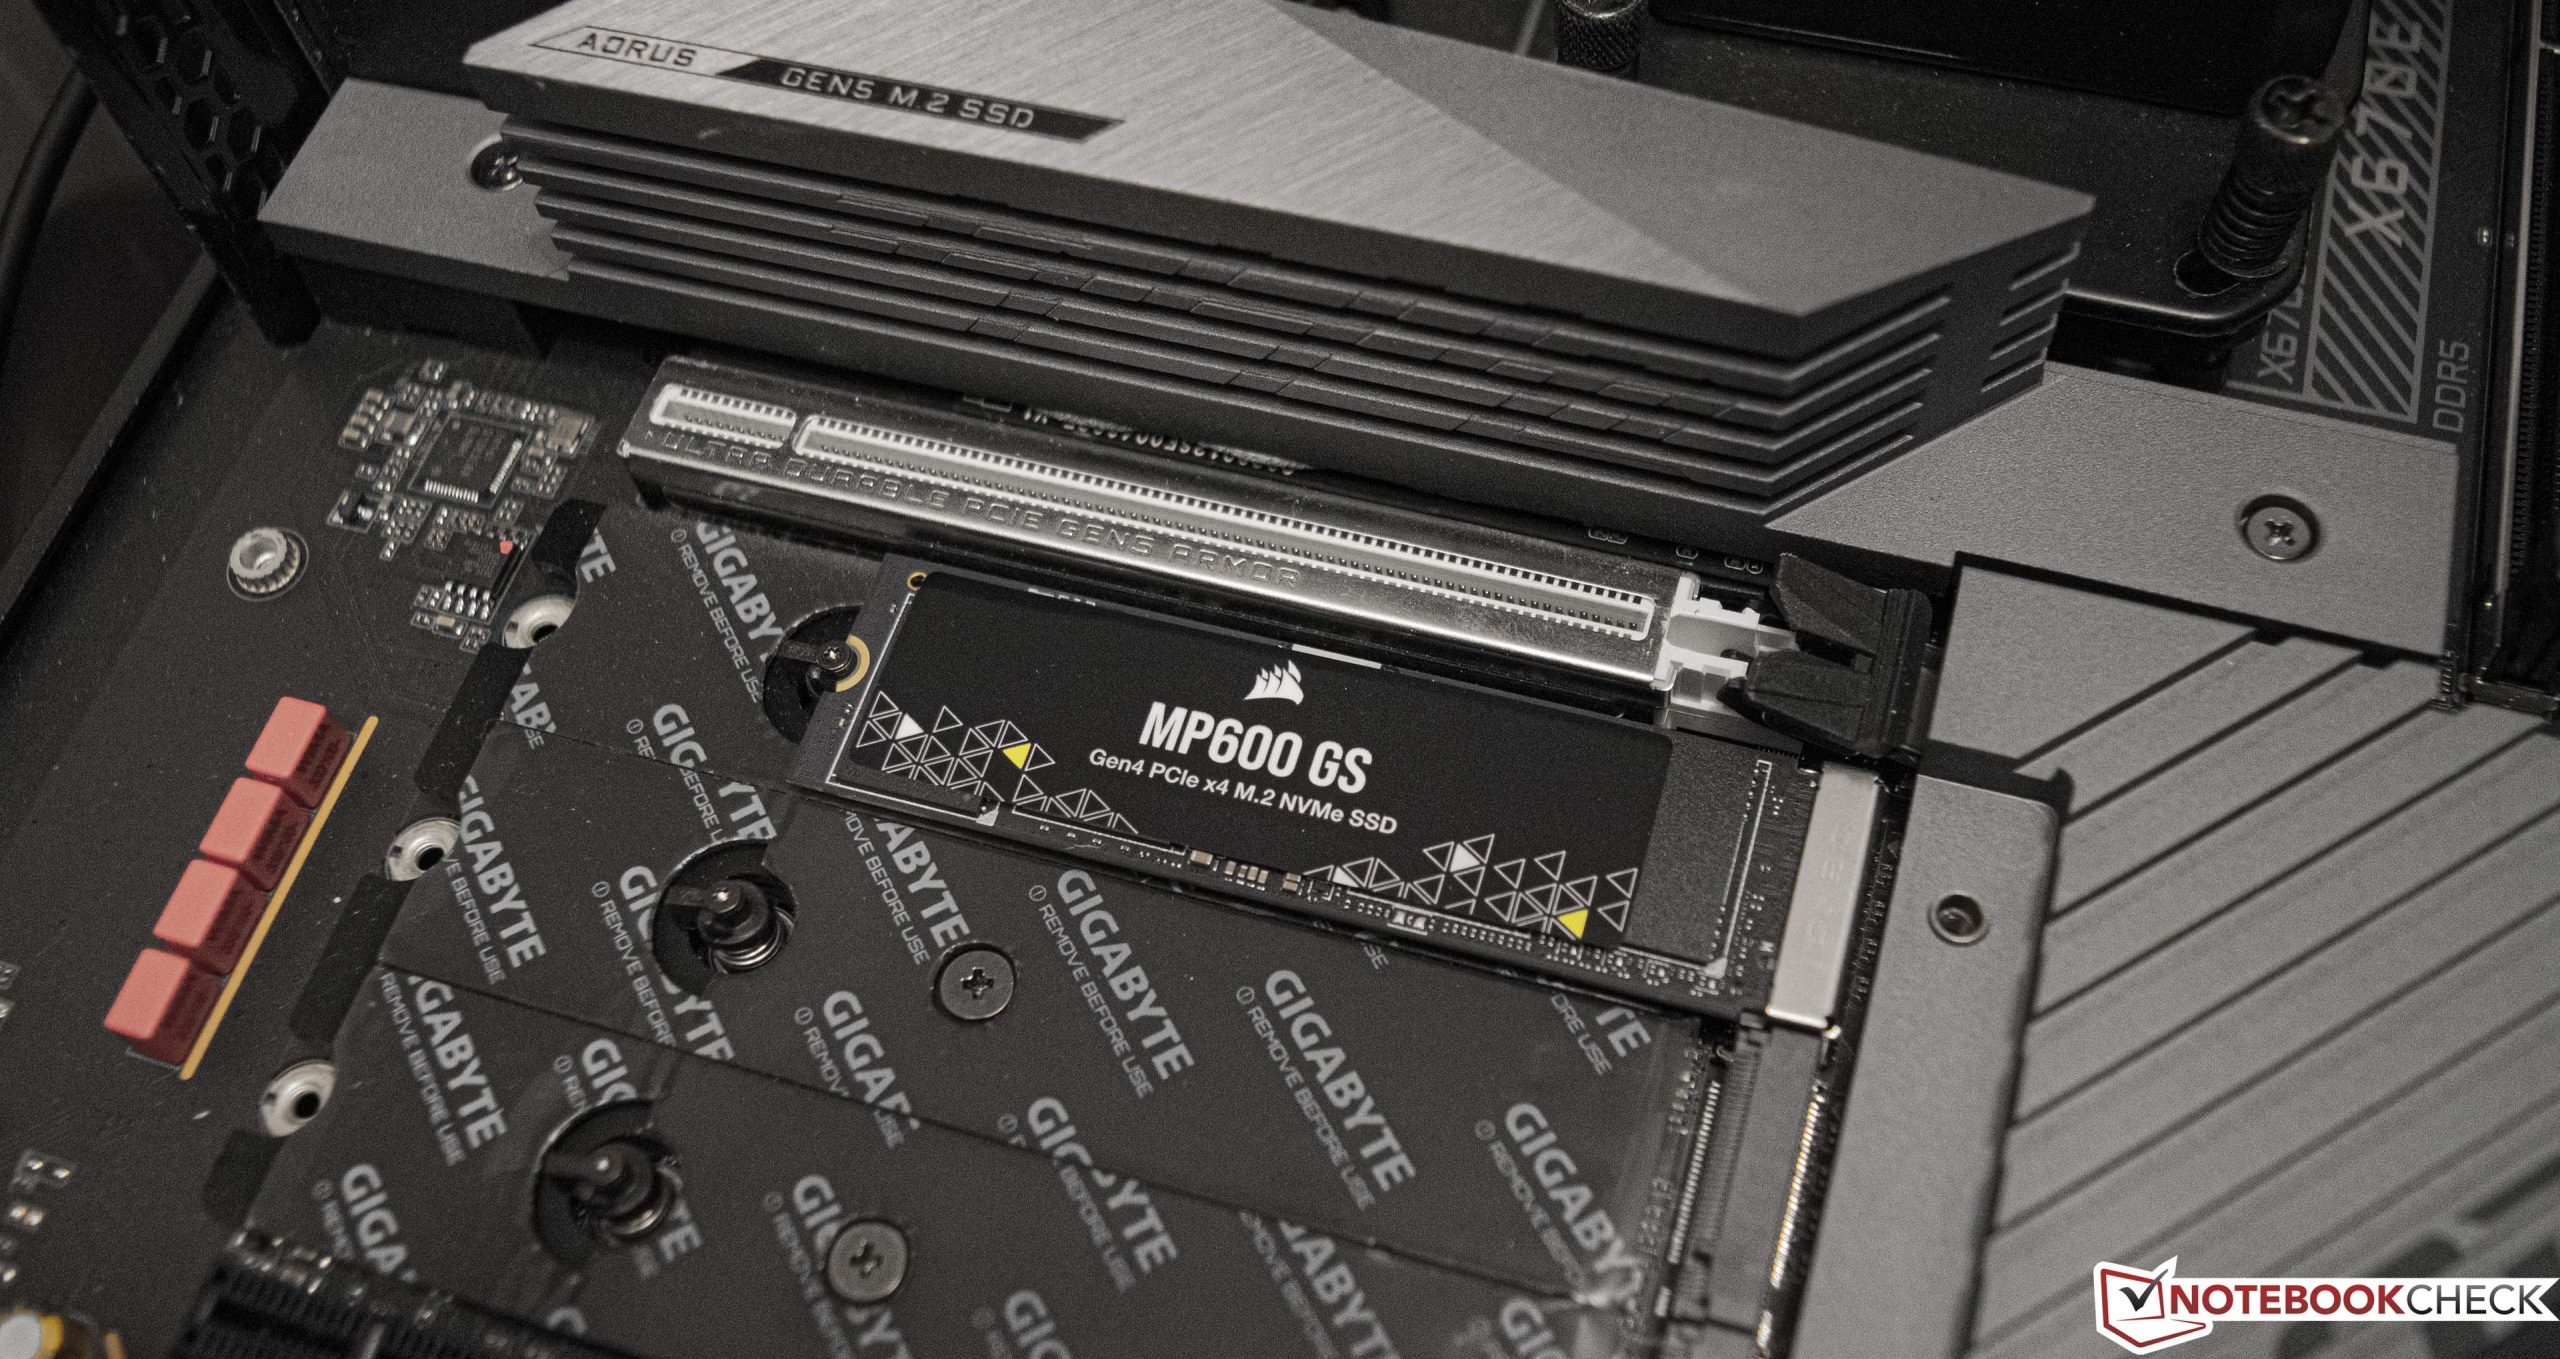 Corsair MP600 GS 2TB SSD In Test: A Fast SSD for Laptops, Desktops, and Mini PCs